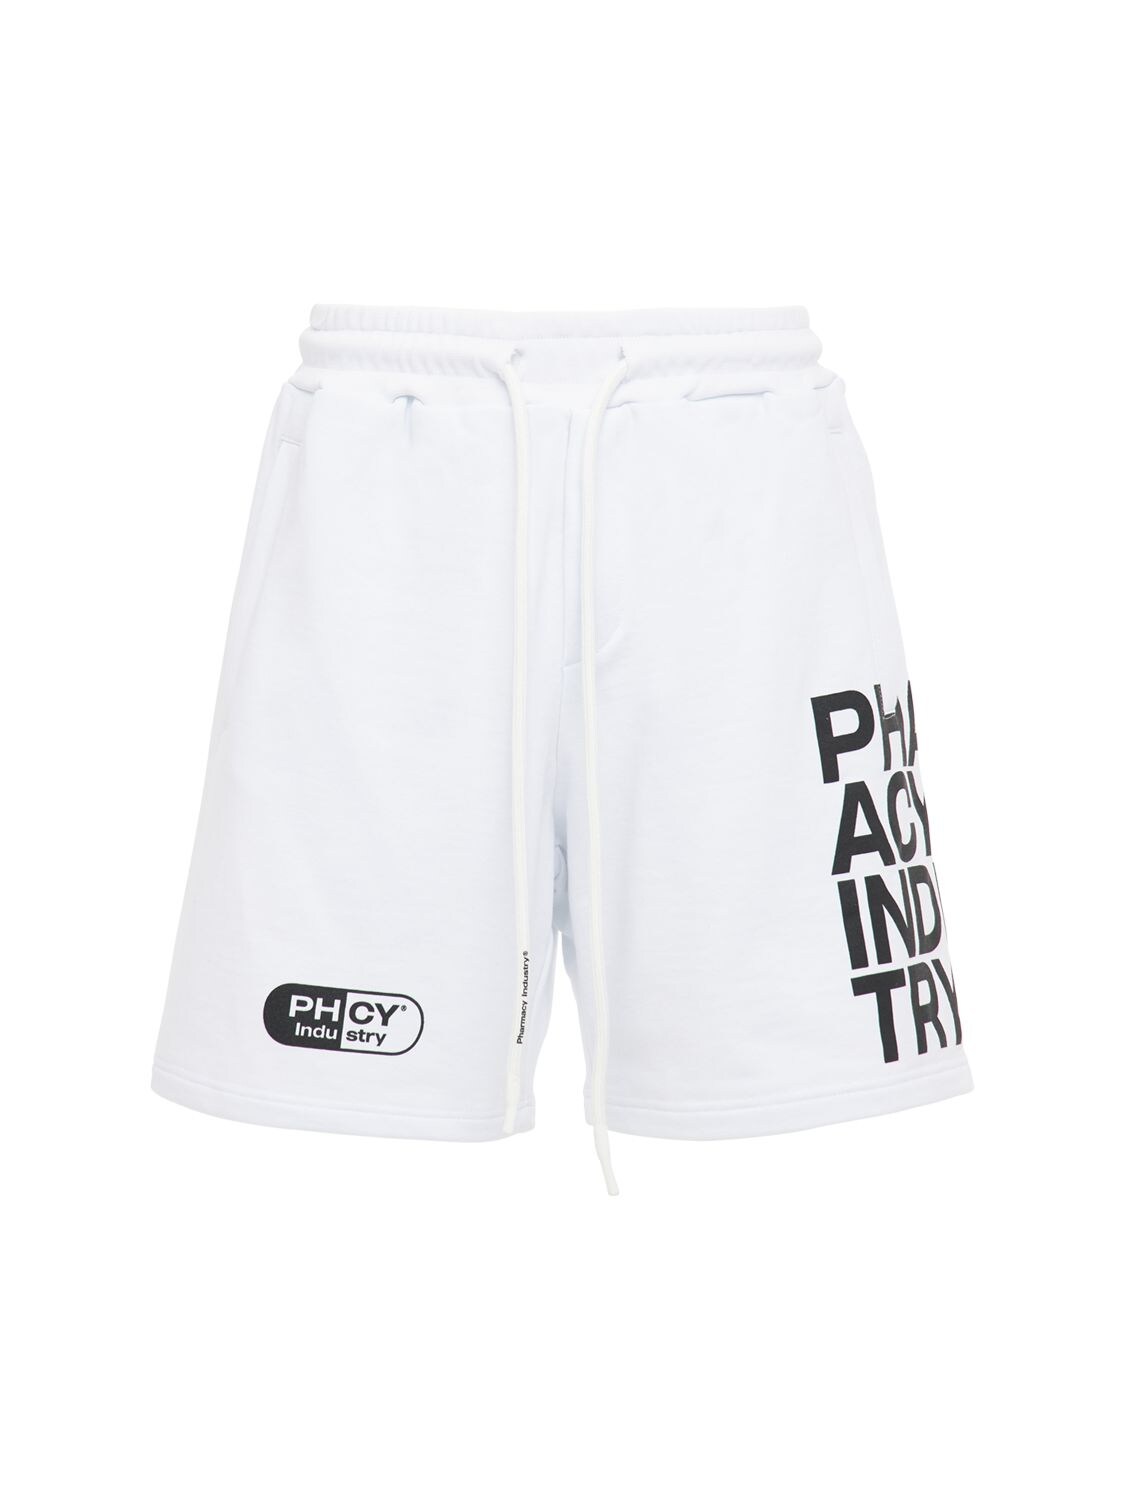 Pharmacy Industry Cottons LOGO PRINTED COTTON SHORTS